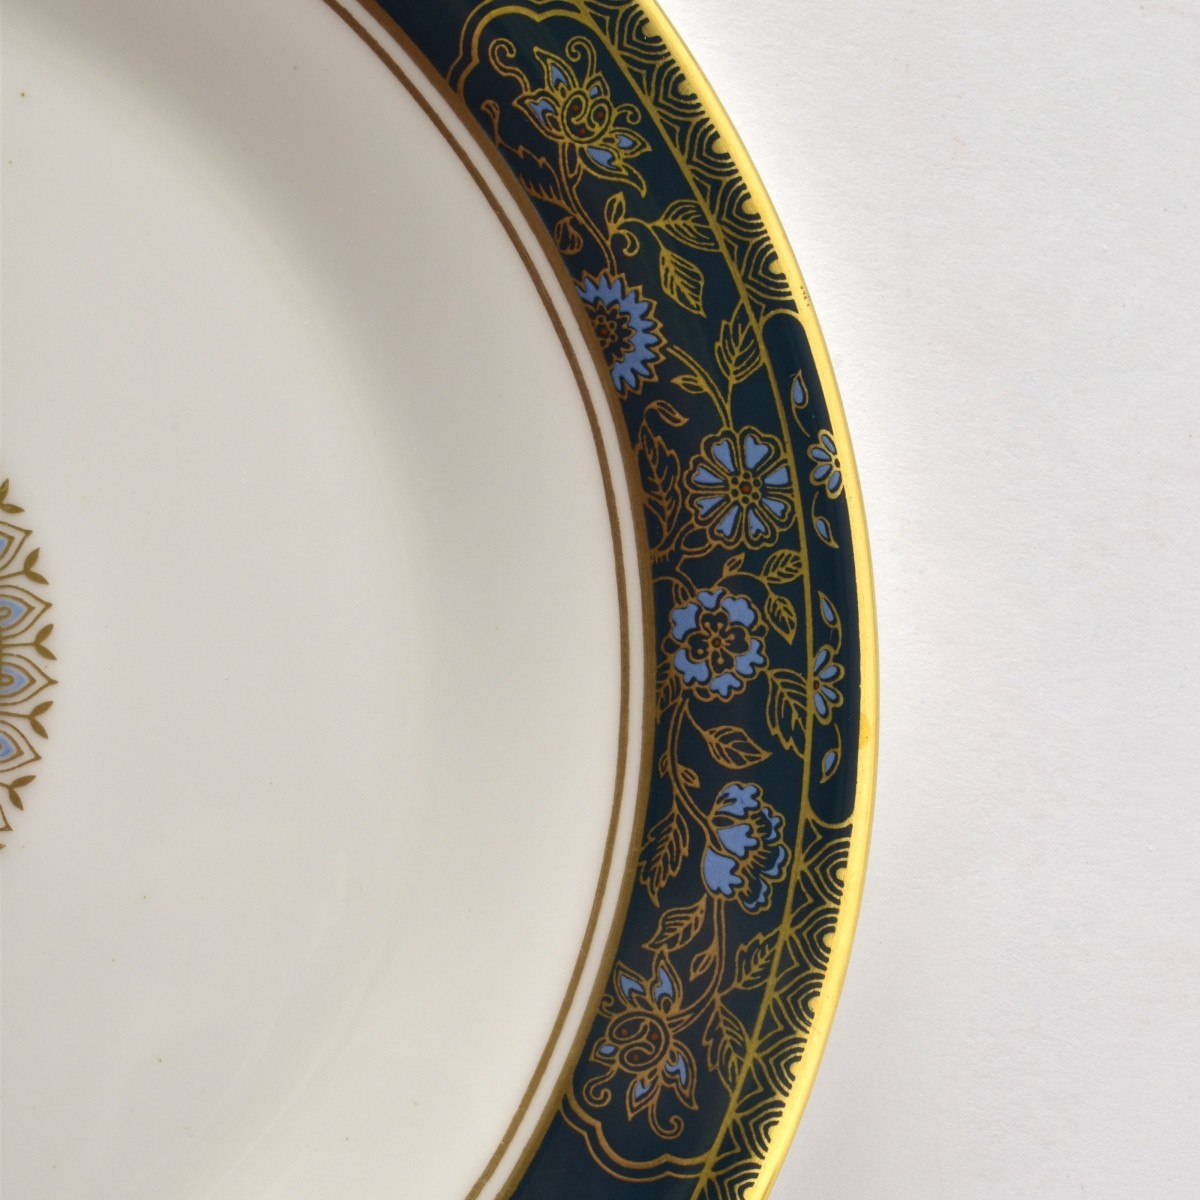 Royal Doulton "Carlyle" Dinner Service